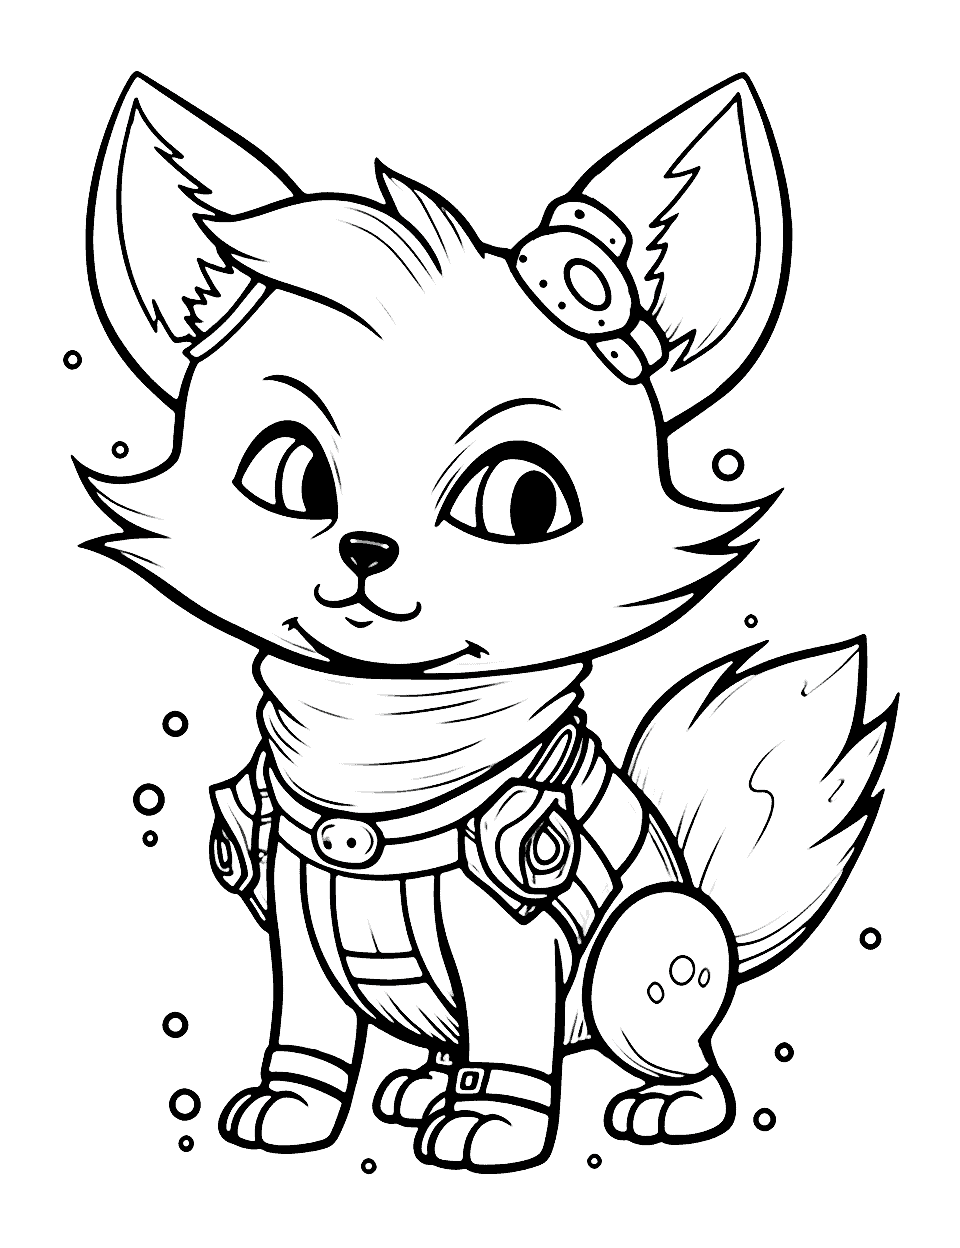 Steampunk Fox Coloring Page - A fox equipped with steampunk gear, ready to embark on a mechanical adventure.